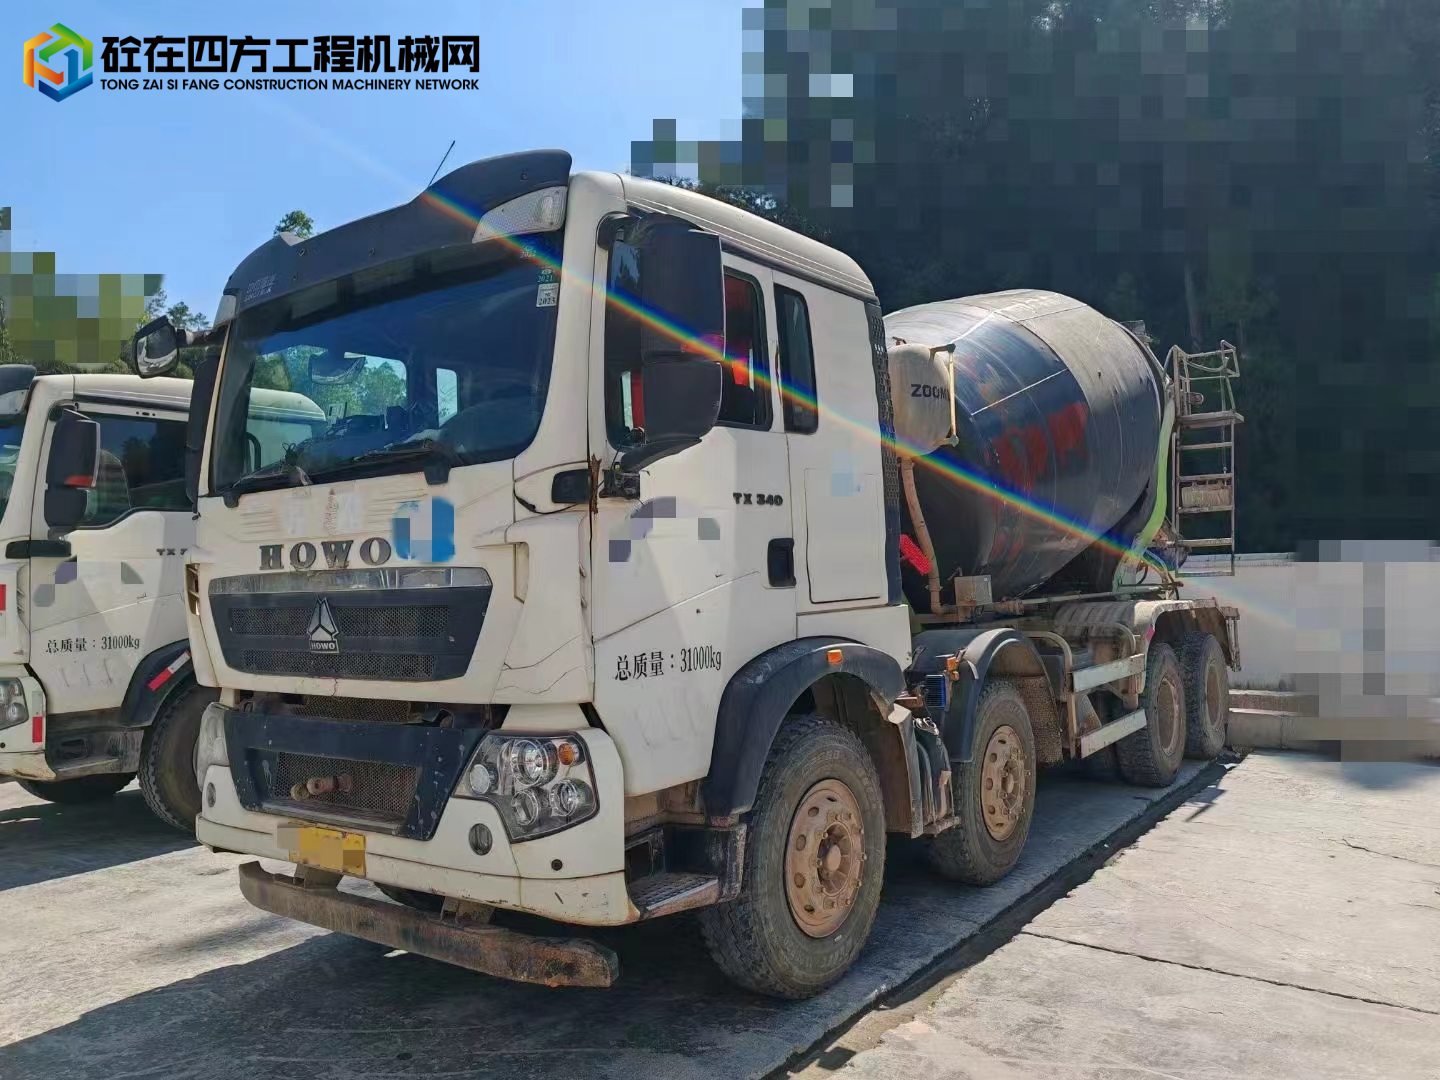 https://images.tongzsf.com/tong/truck_machine/20231207/165712c37acd5a.jpg